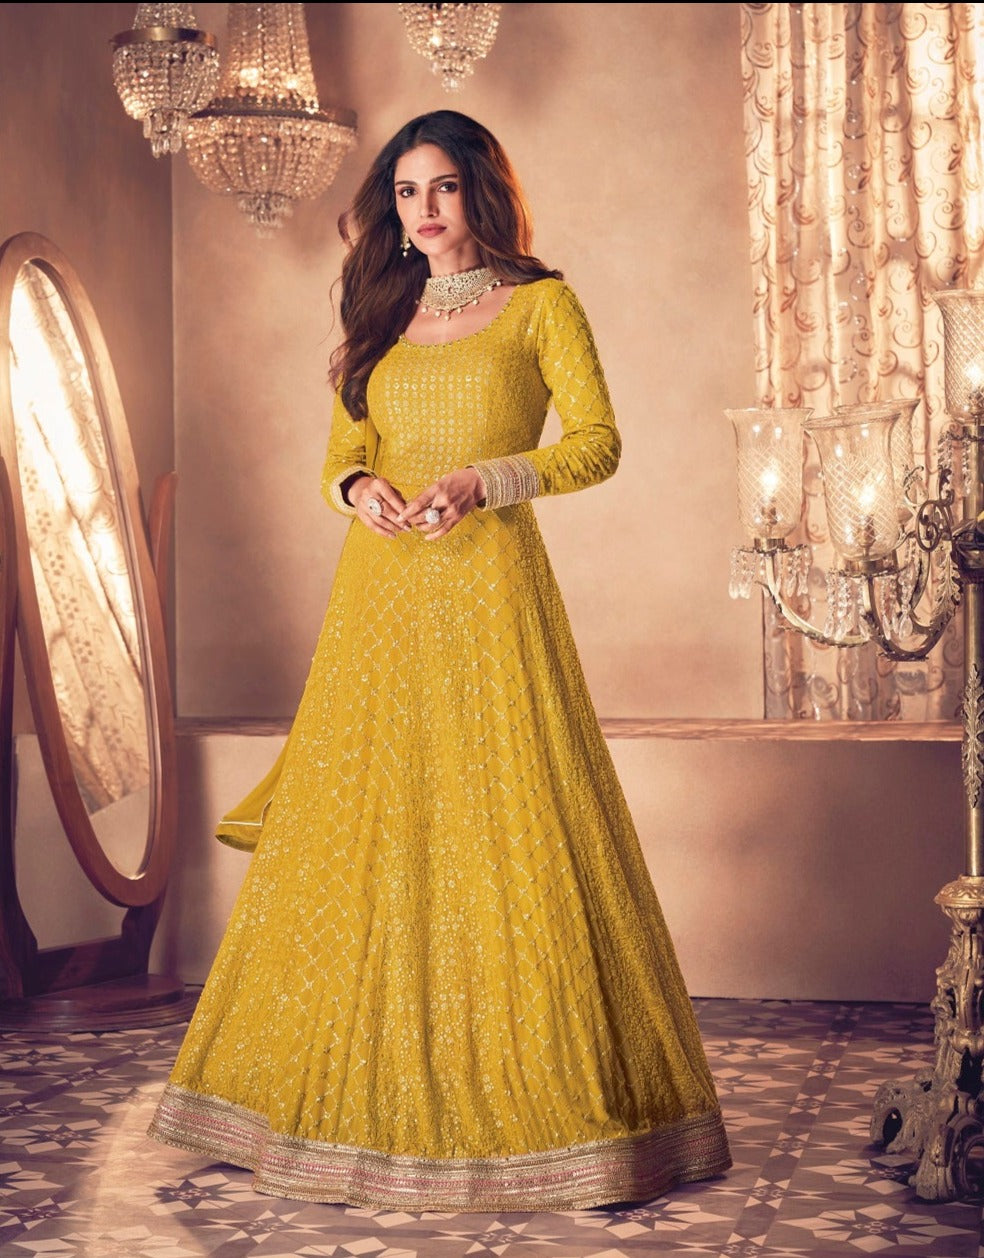 Get the Latest Gowns for Girls | Gowns for girls, Frocks for girls, Diwali  dresses